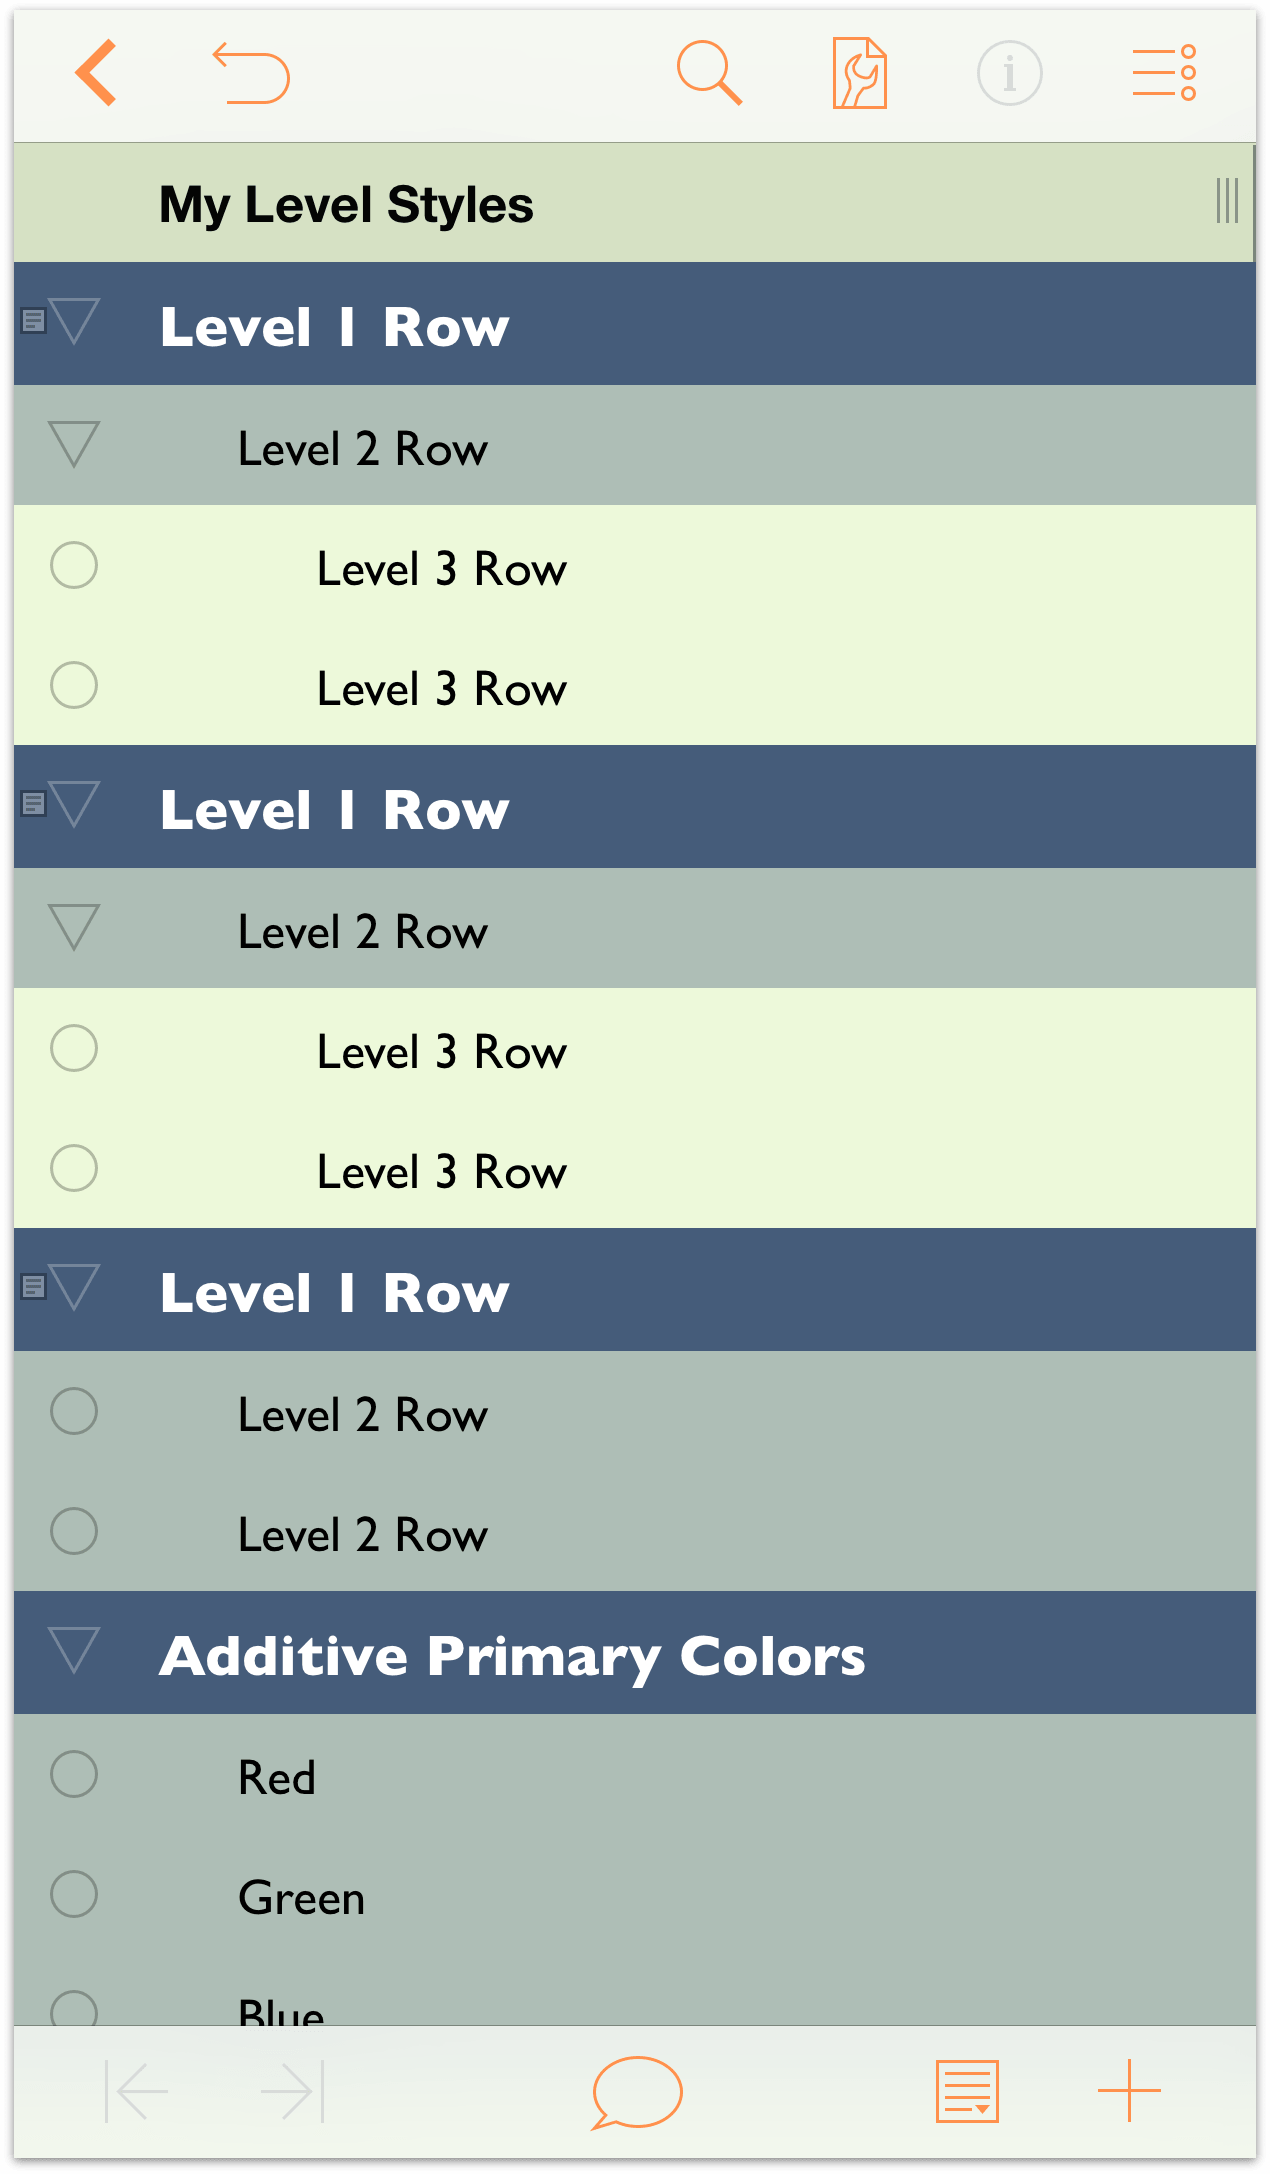 The outline with styled Level 3 Rows